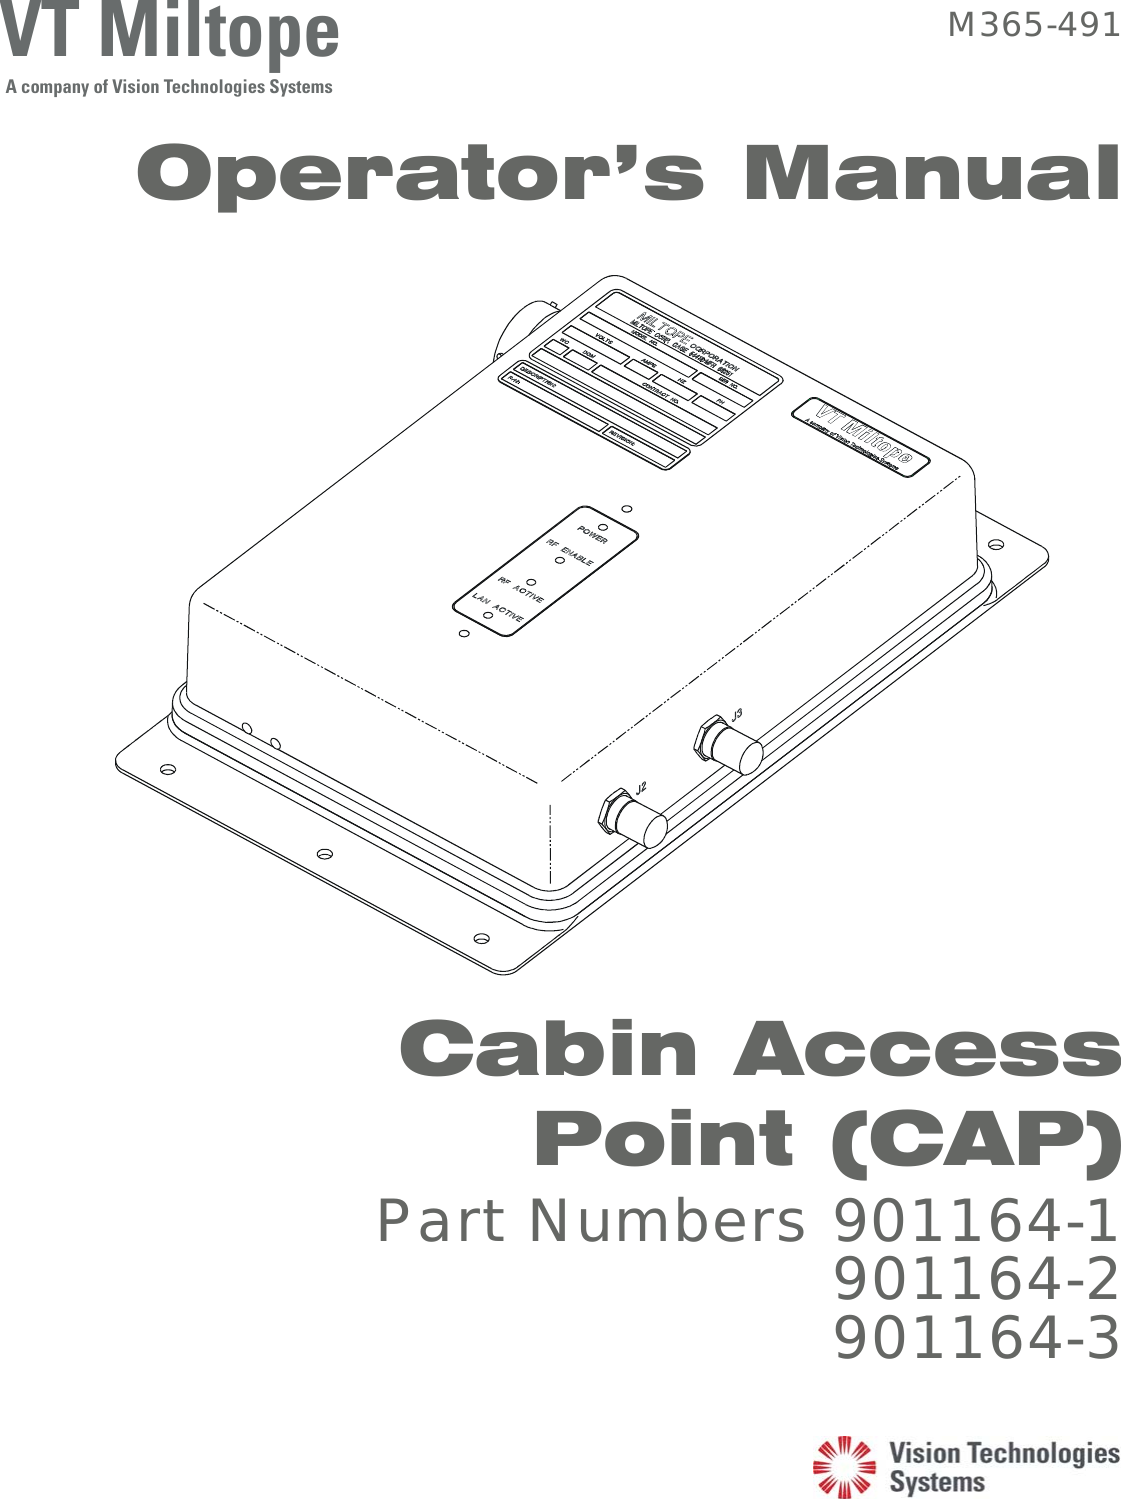  VT MiltopeA company of Vision Technologies Systems M365-491 Operator’s Manual     Cabin Access Point (CAP)  Part Numbers 901164-1 901164-2 901164-3  